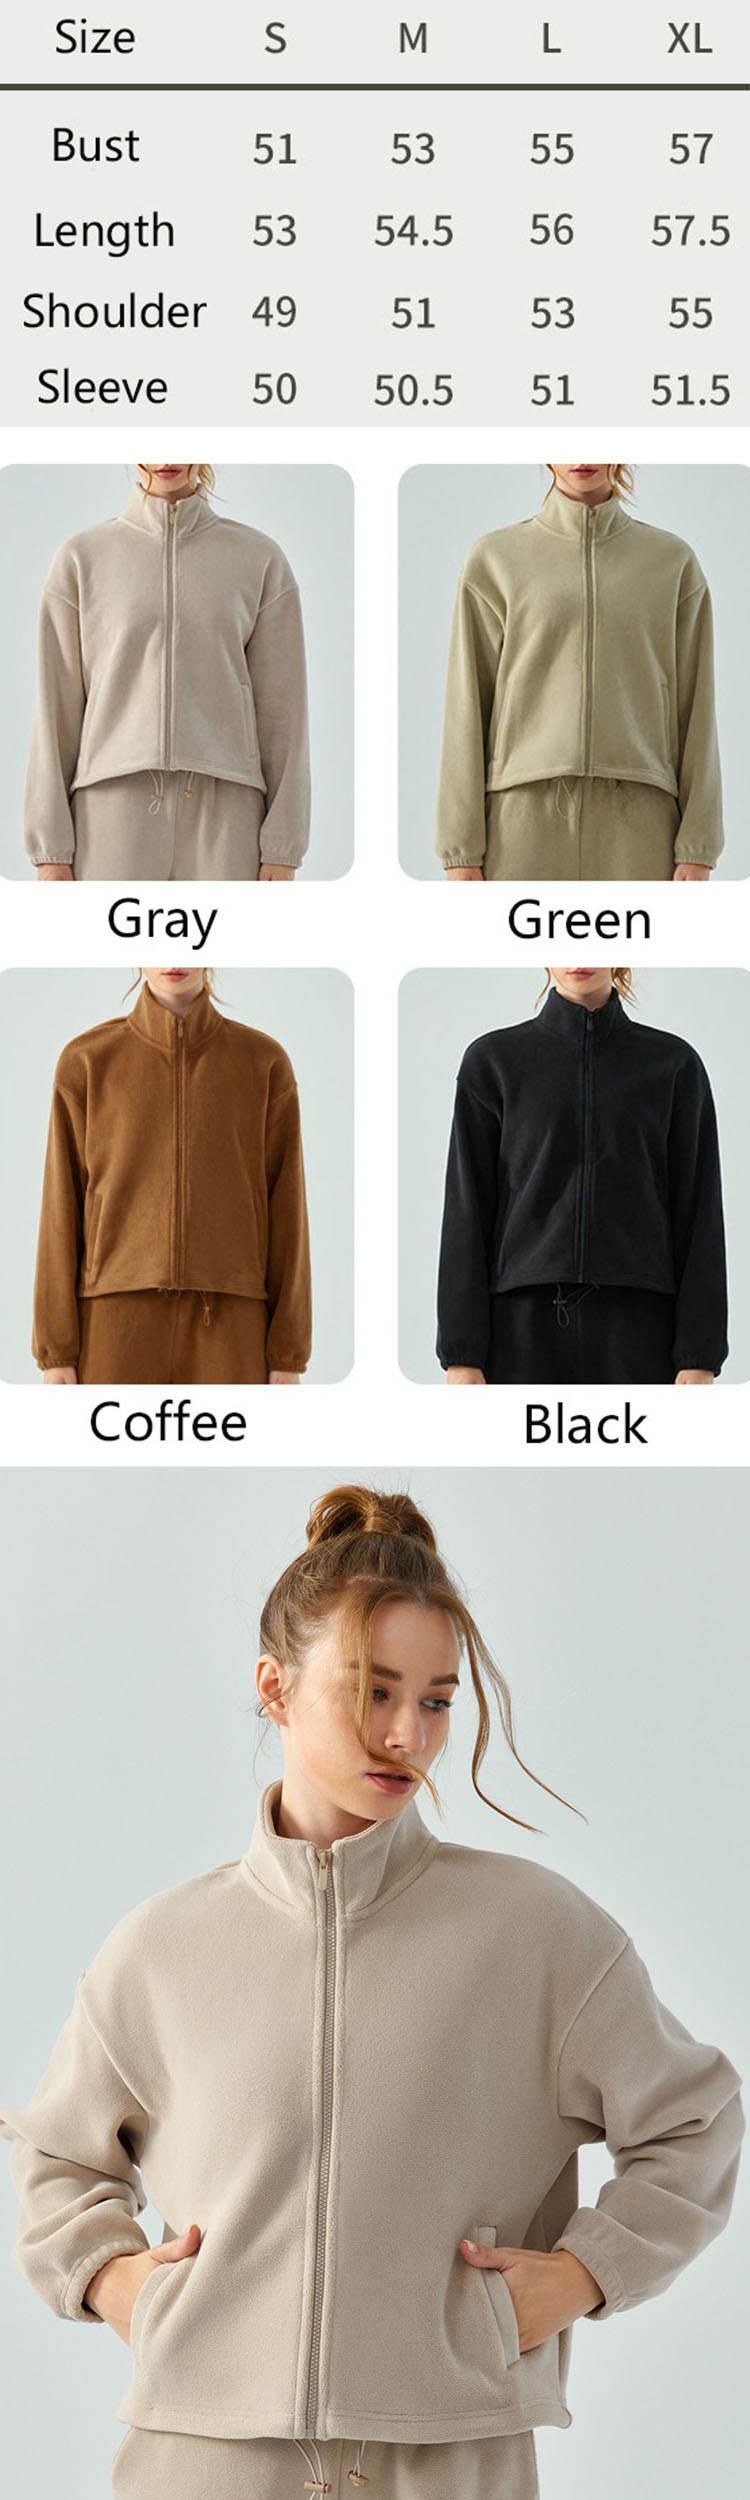 Adopt stand-up collar design, which is comfortable and not le neck, windproof and warm